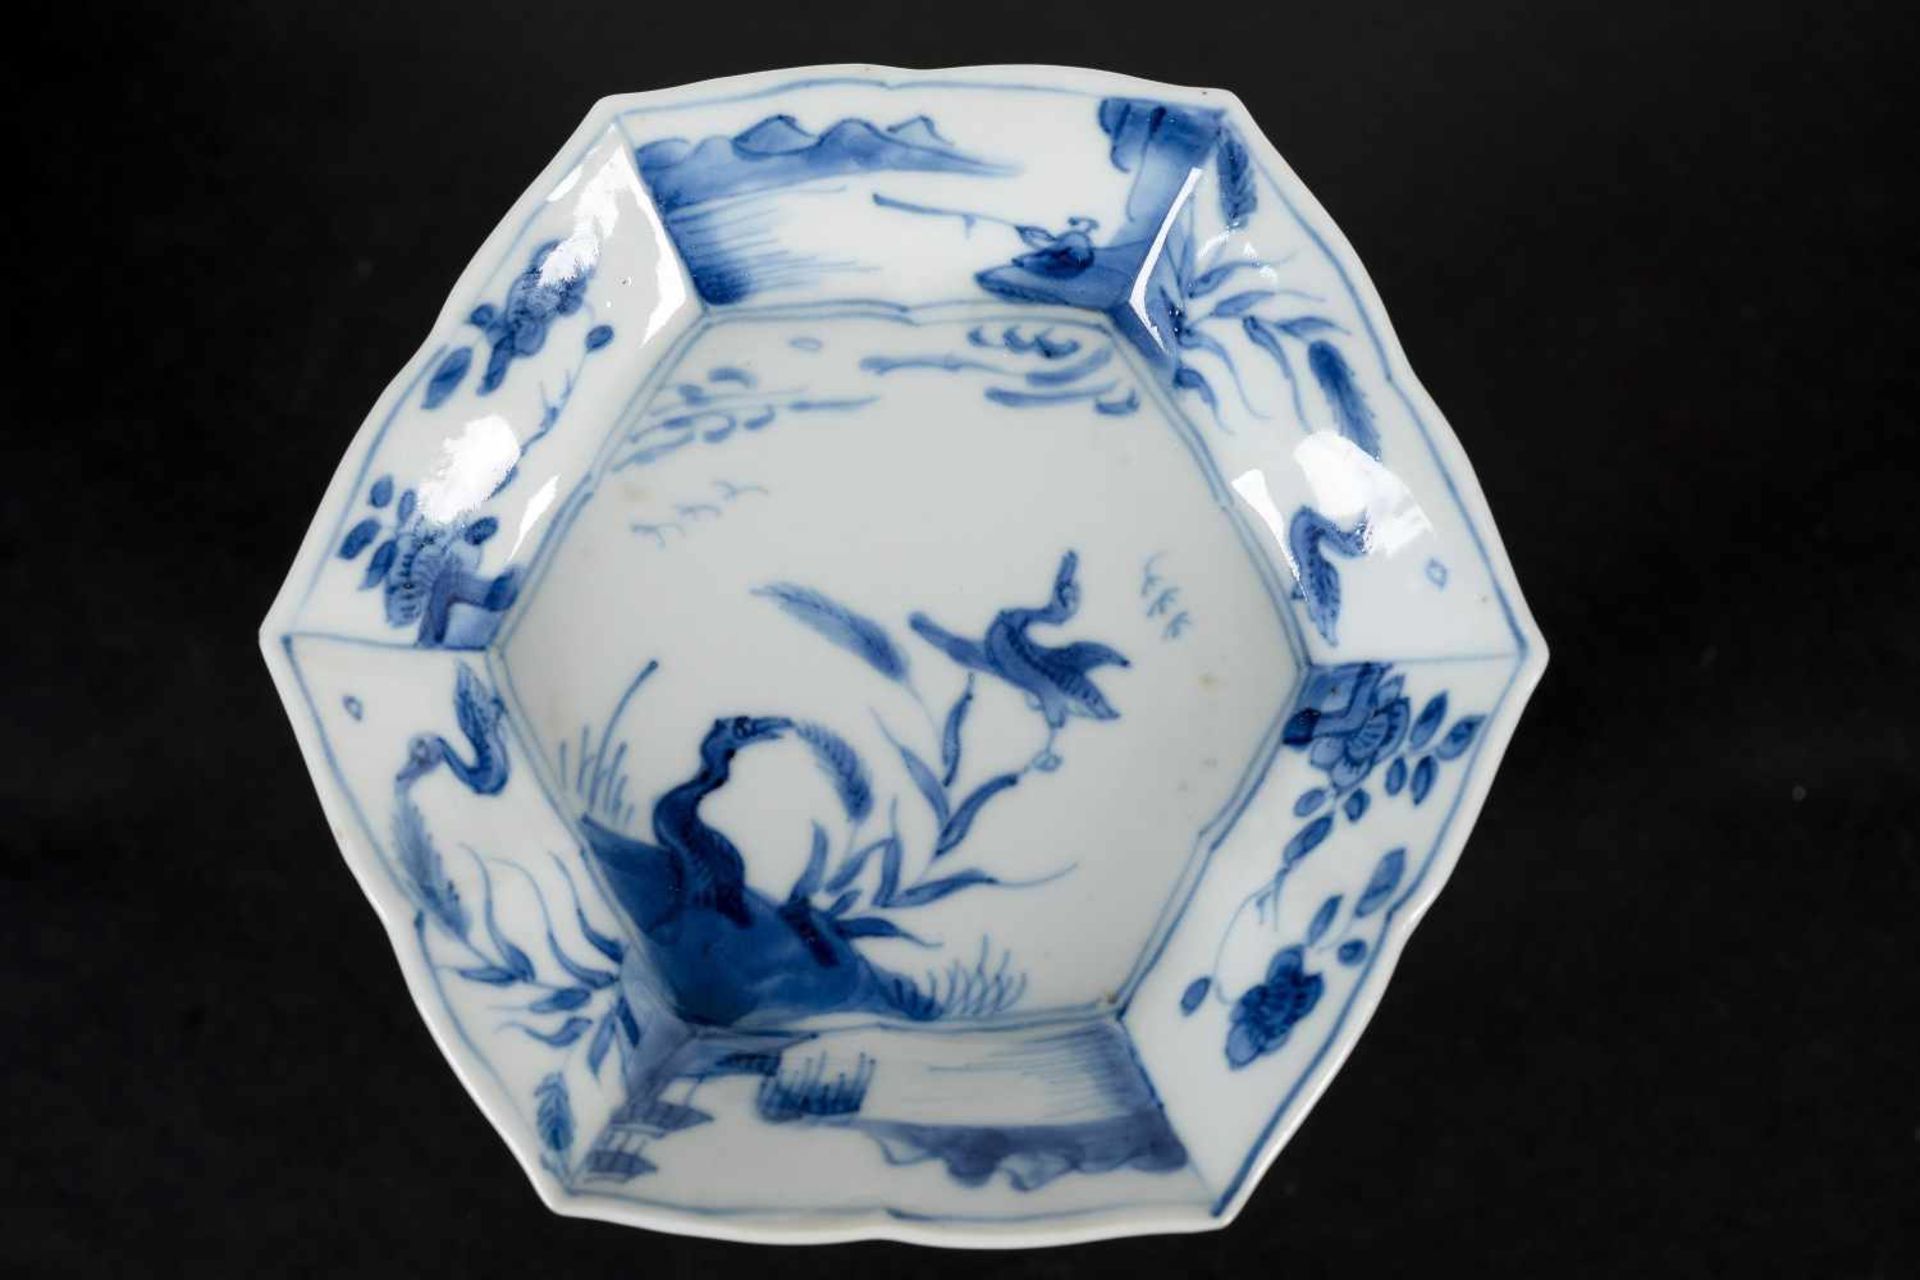 A set of three hexagonal blue and white porcelain cups with saucers, decorated with ducks, flowers - Image 7 of 12